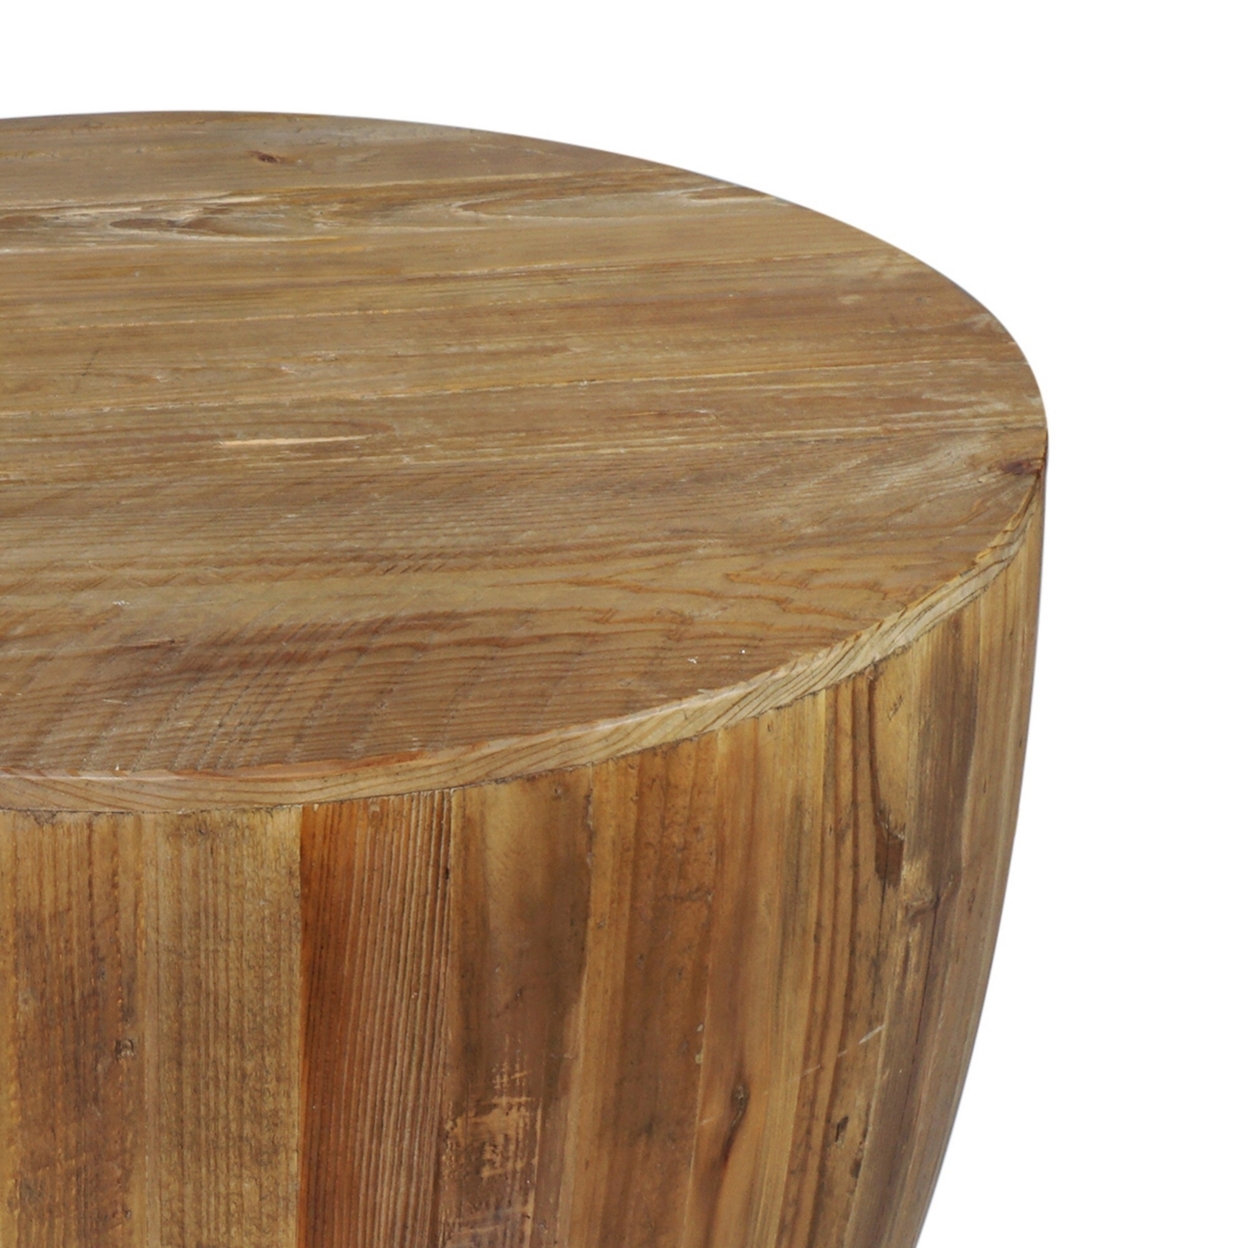 26 Inch Side End Table, Recycled Fir Wood, Round Drum Shape, Walnut Brown- Saltoro Sherpi